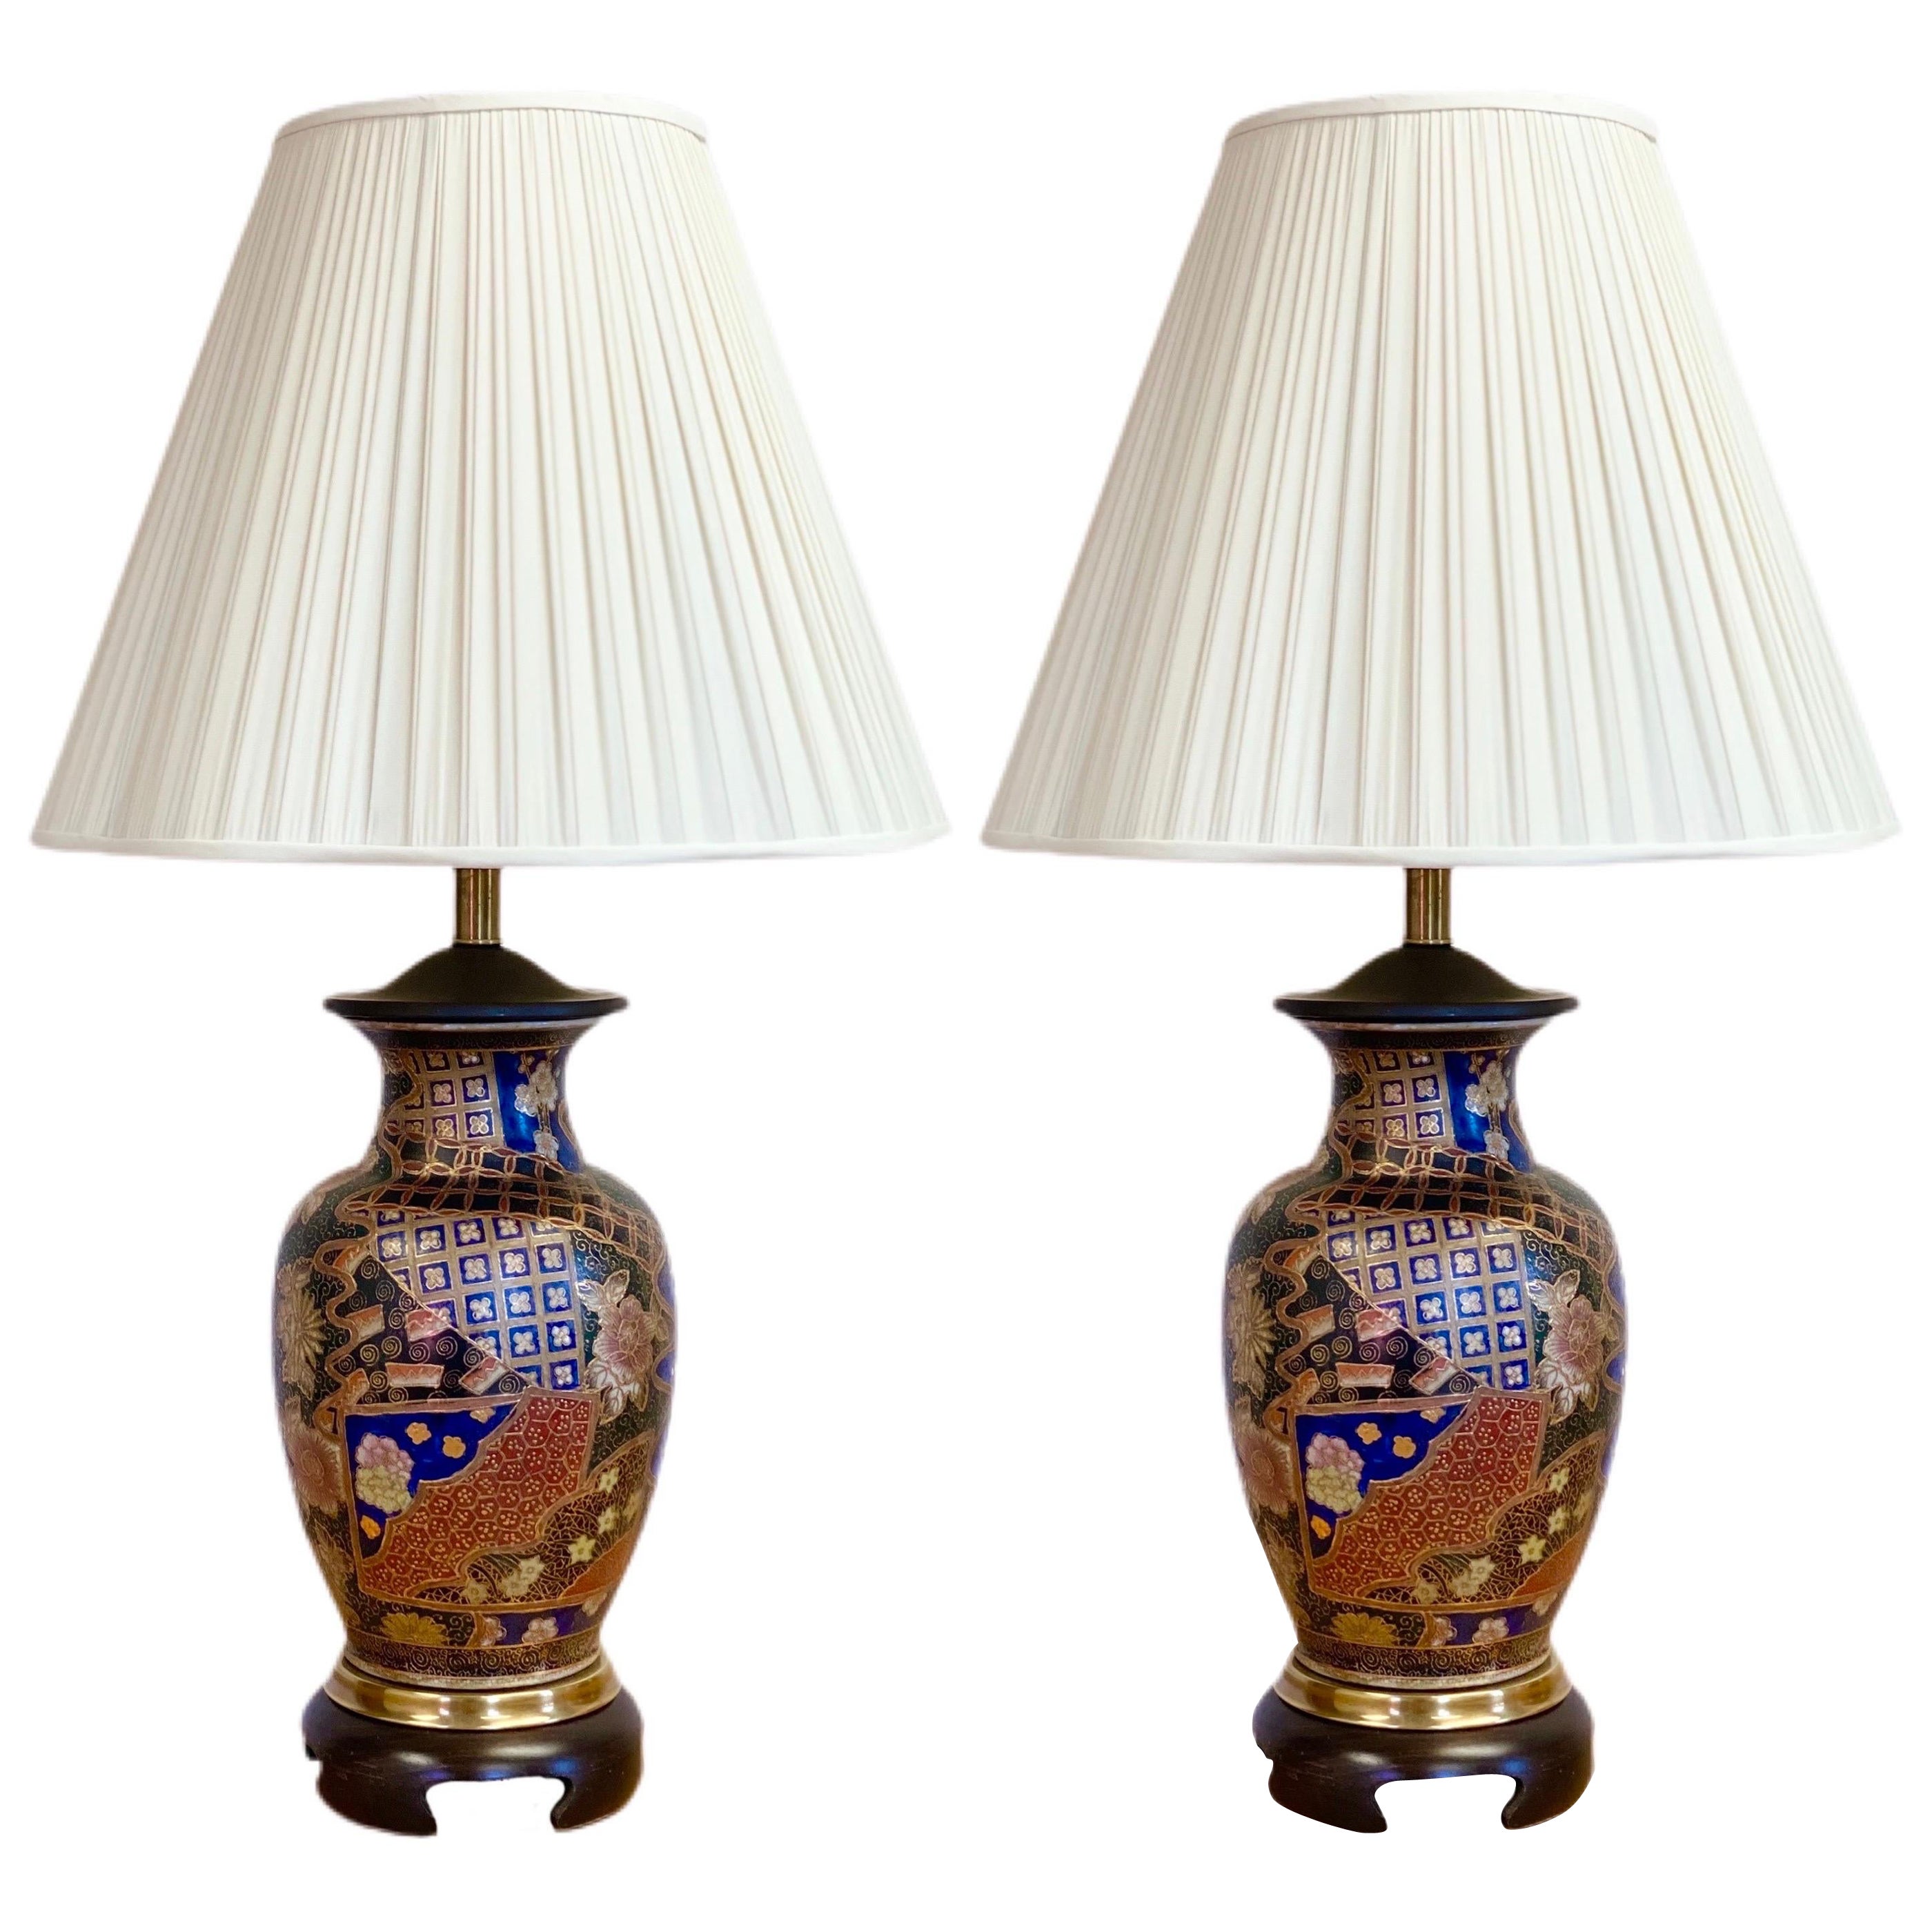 Frederick Cooper Chinoiserie Ginger Porcelain Table Lamps with Shades, a Pair